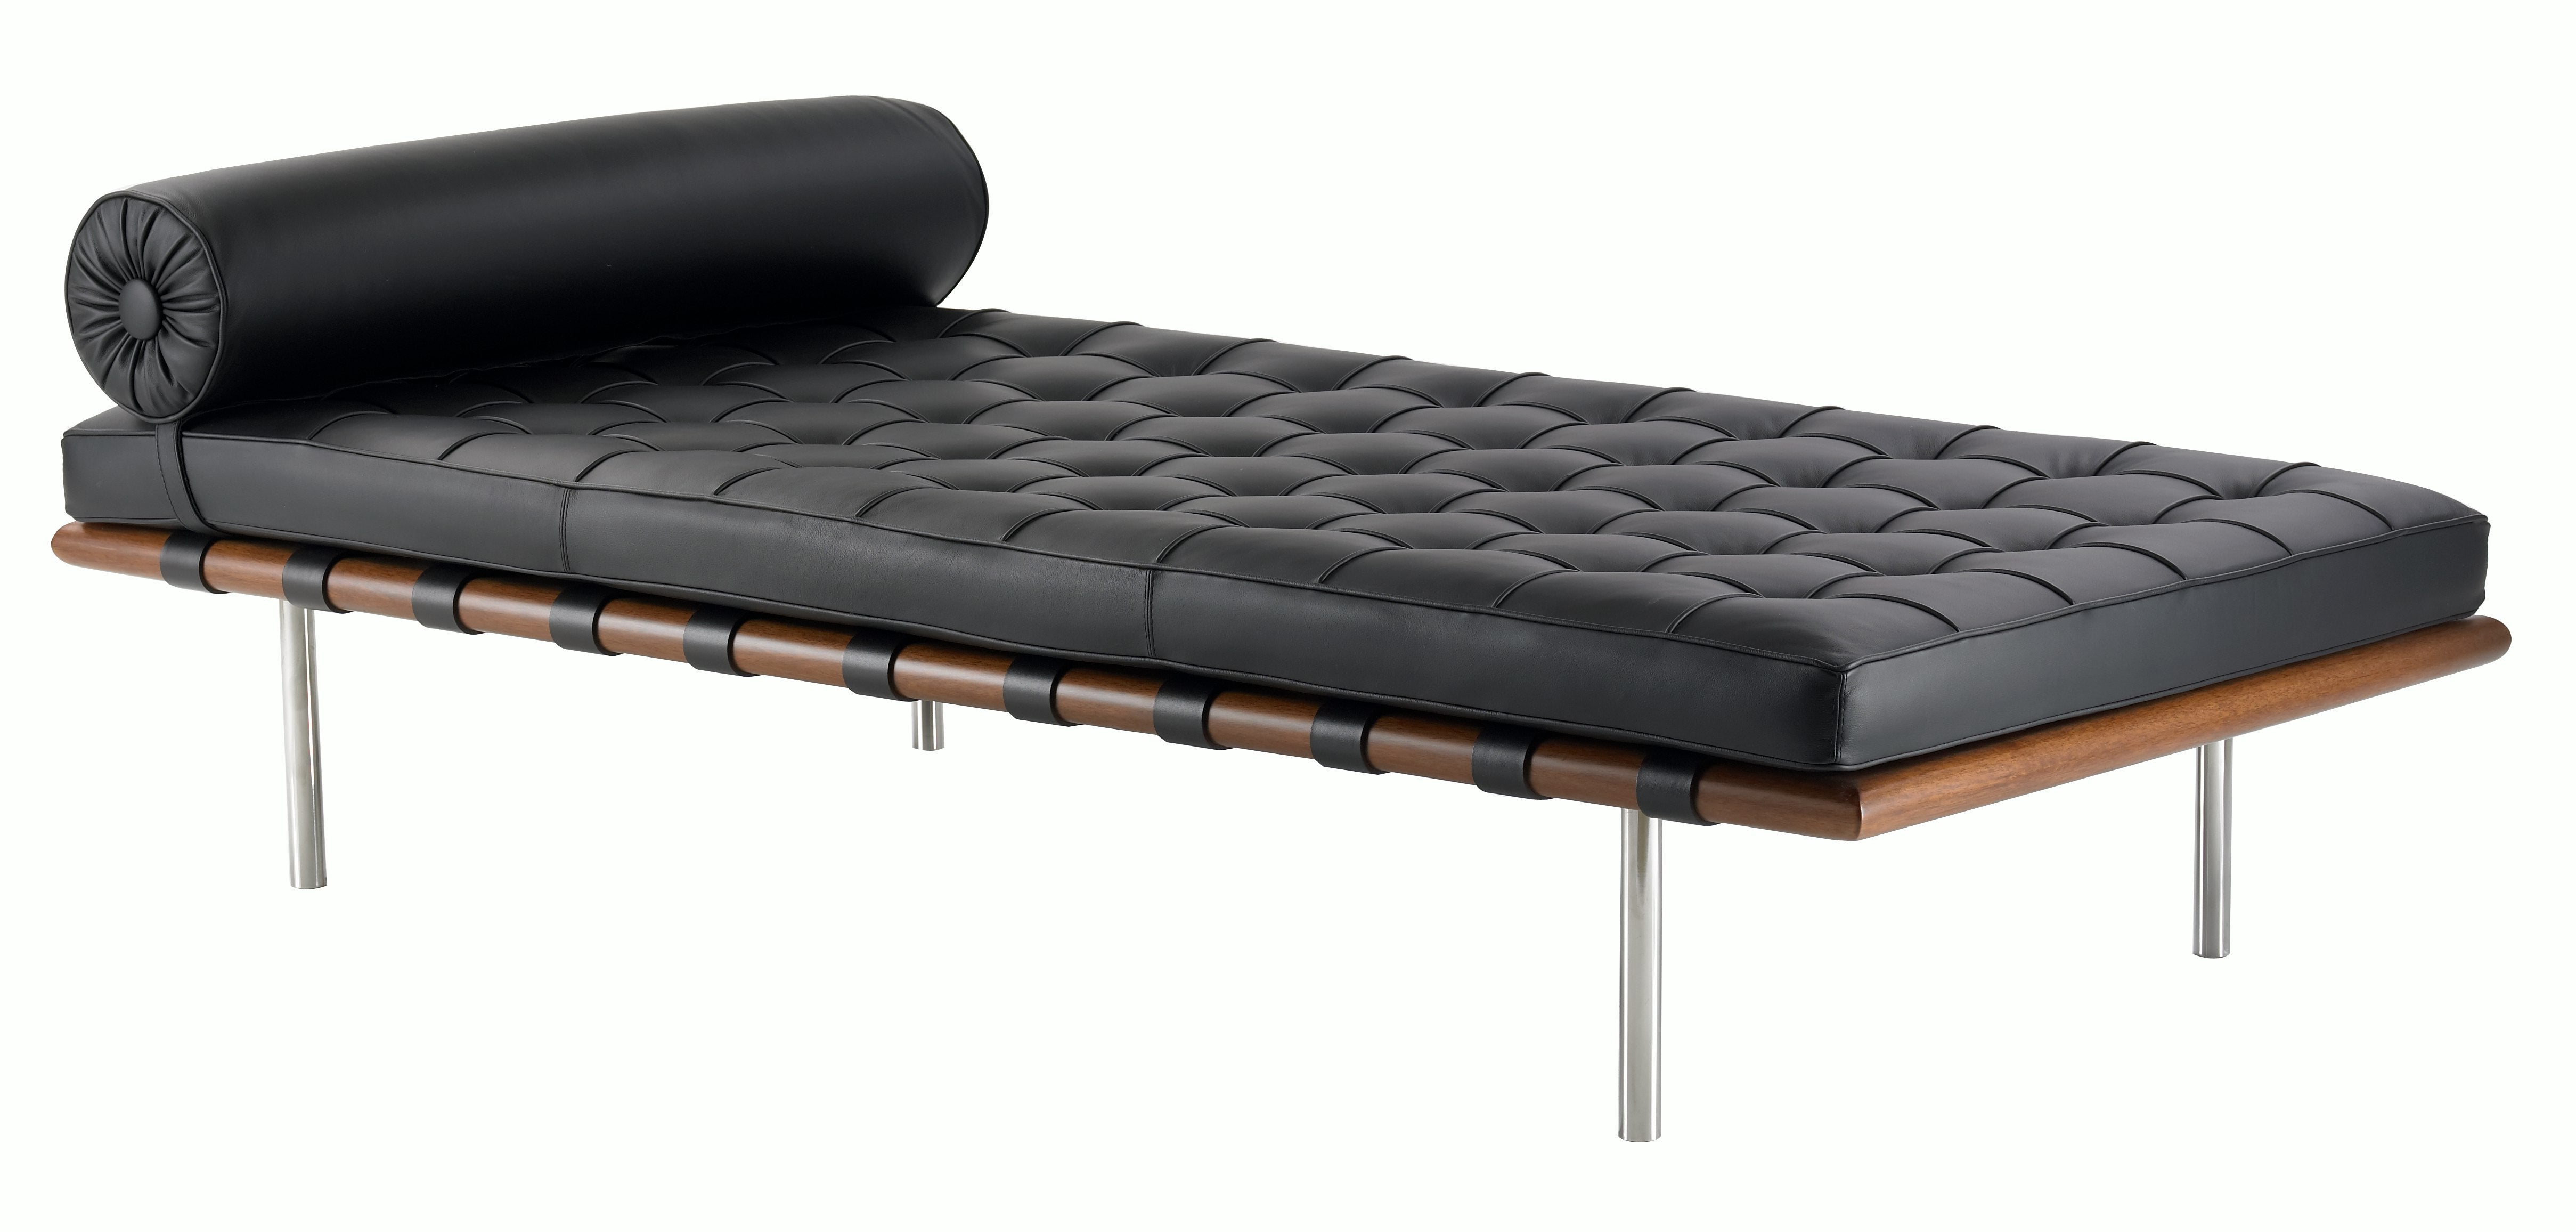 Barcelona Day Bed